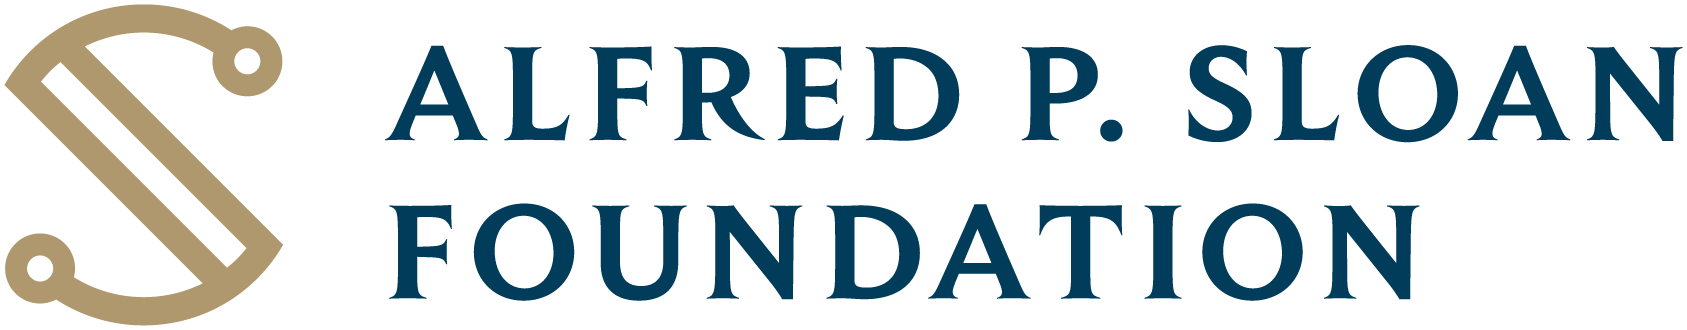 Alfred P. Sloan Foundation.png